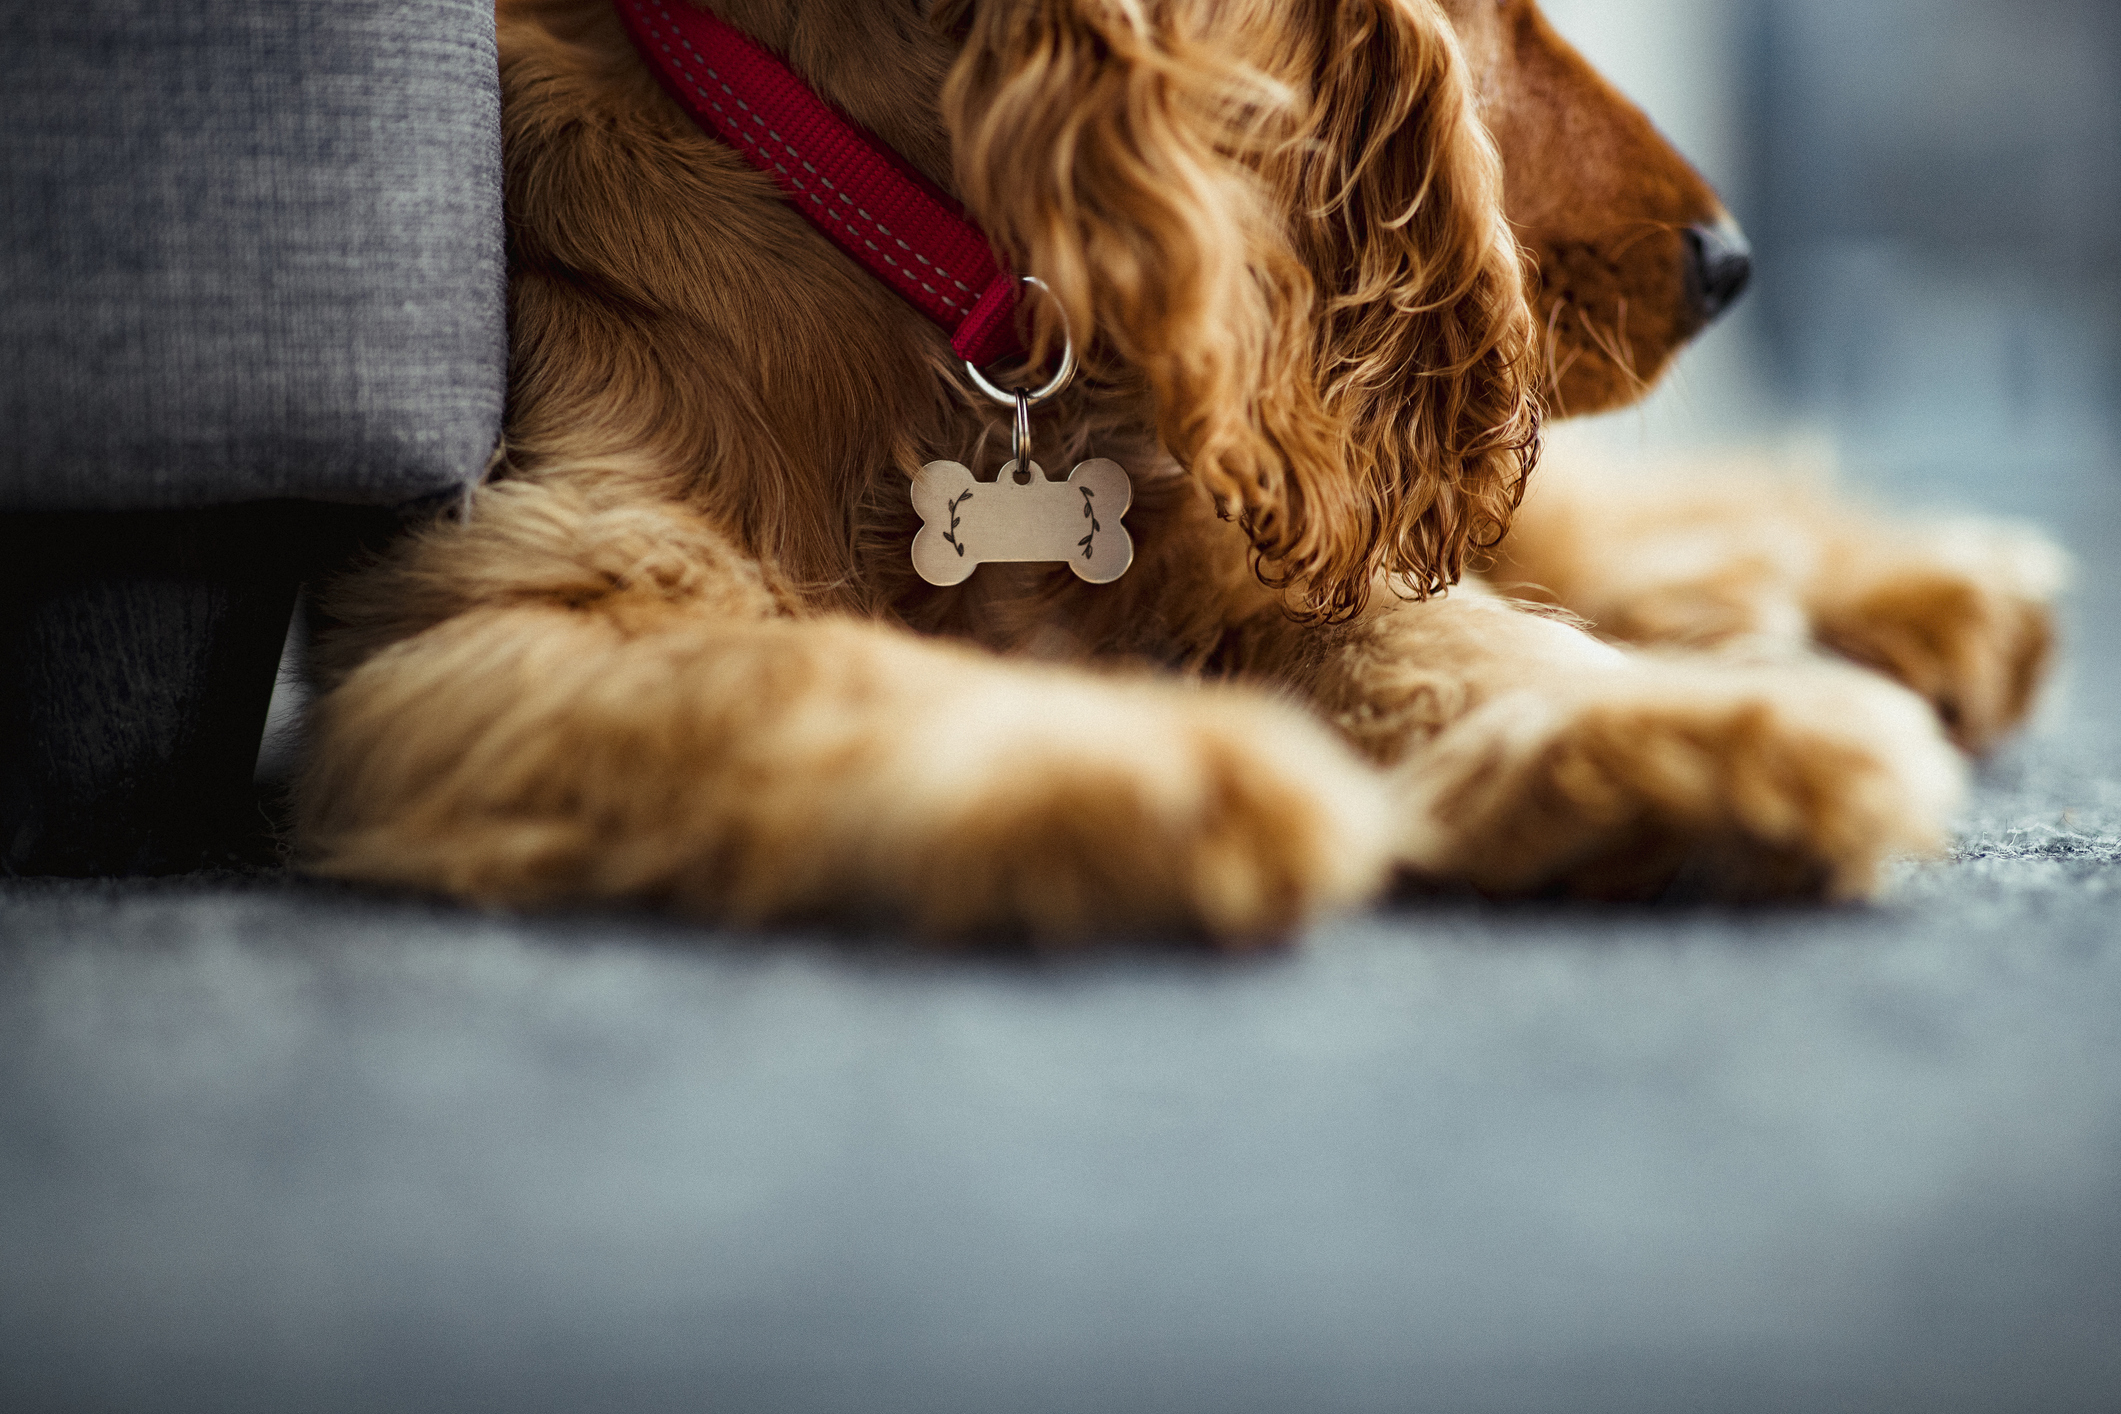 Dog with tag